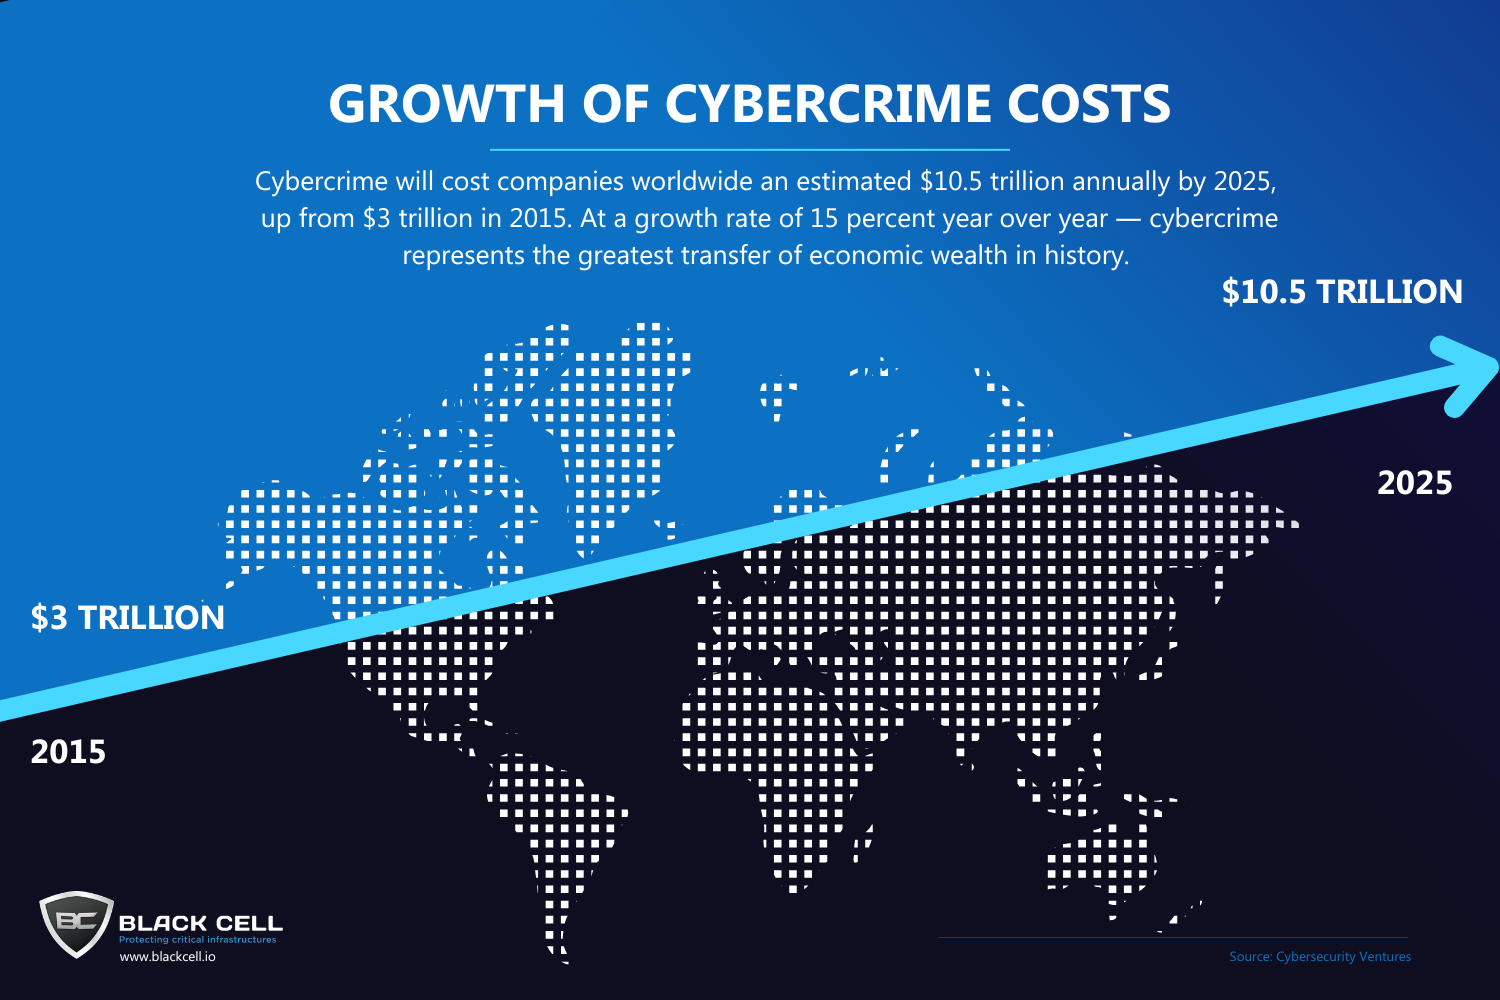 Growth of Cybercrime Costs | Infographic